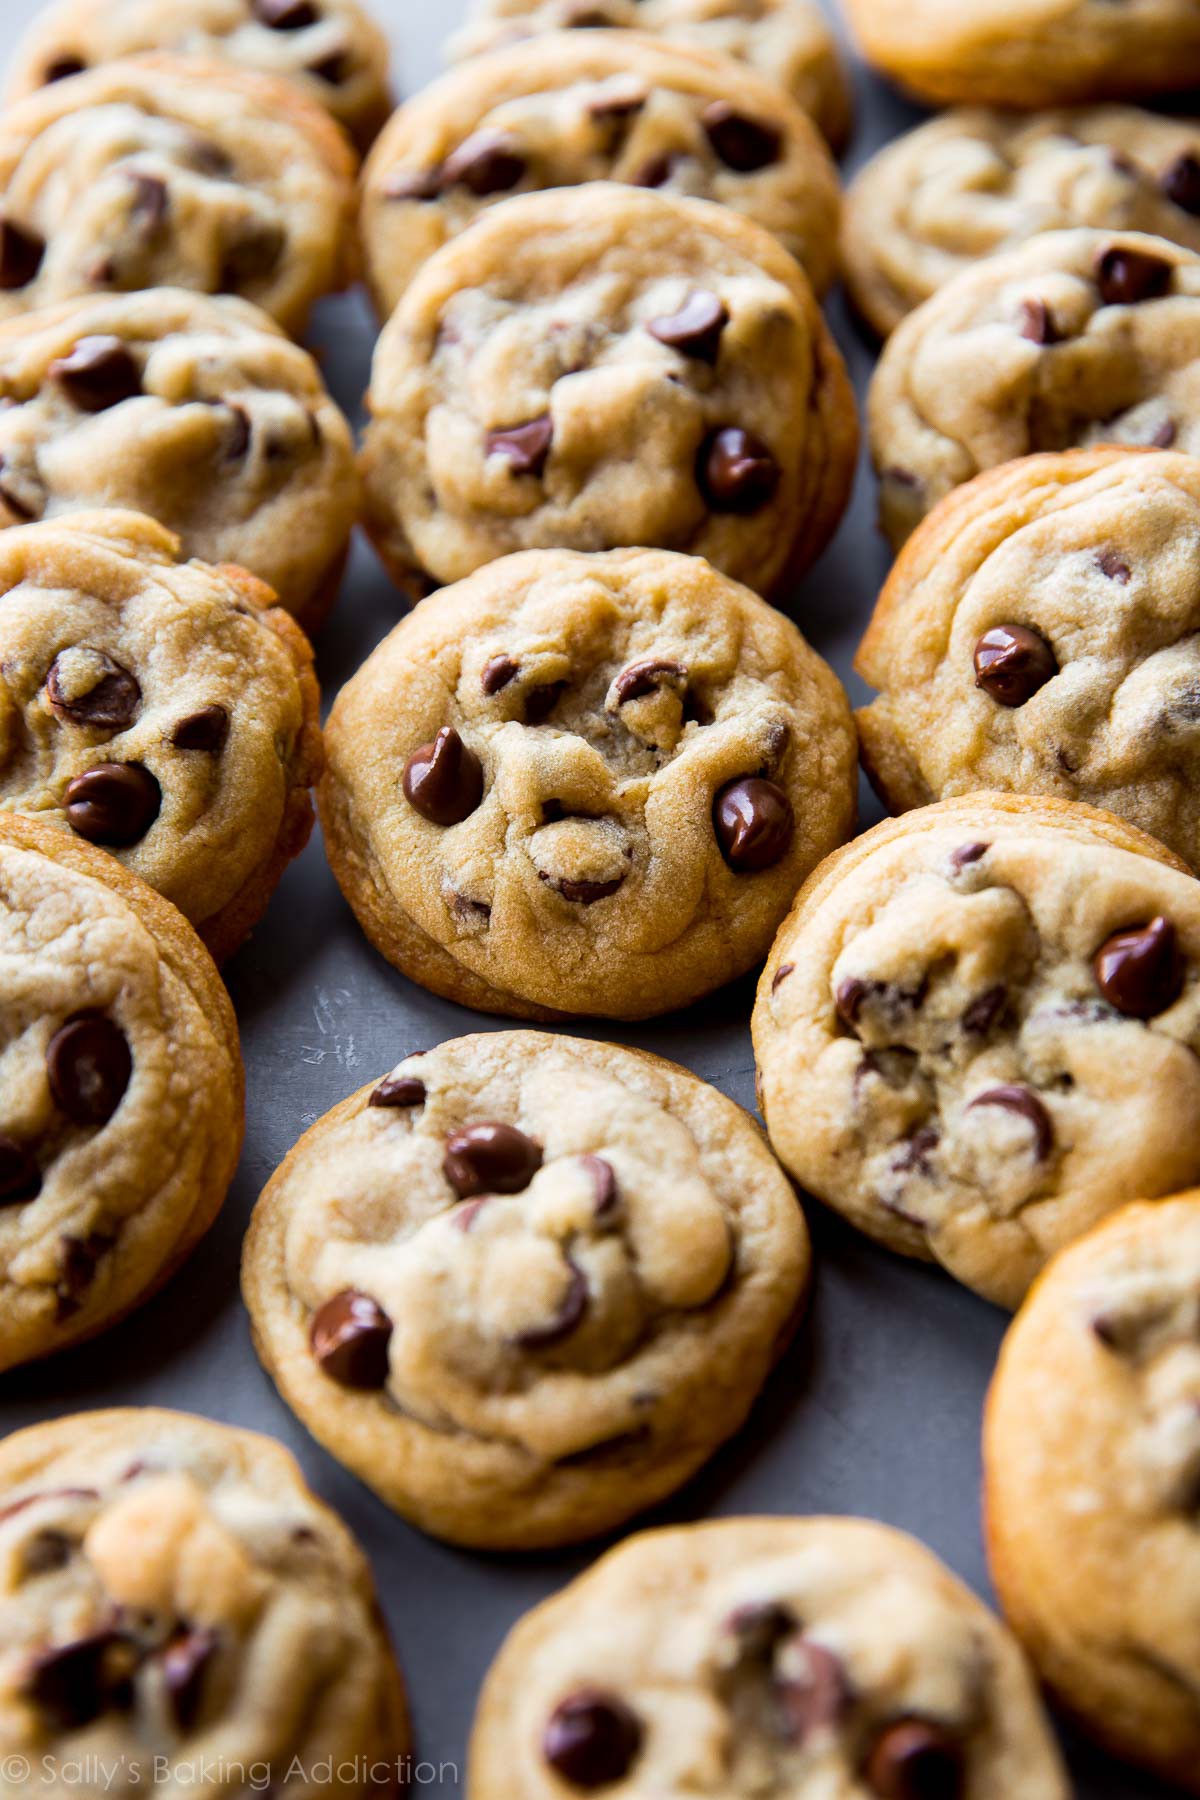 The Best Soft Chocolate Chip Cookies | Wendy Blatchley | Copy Me That